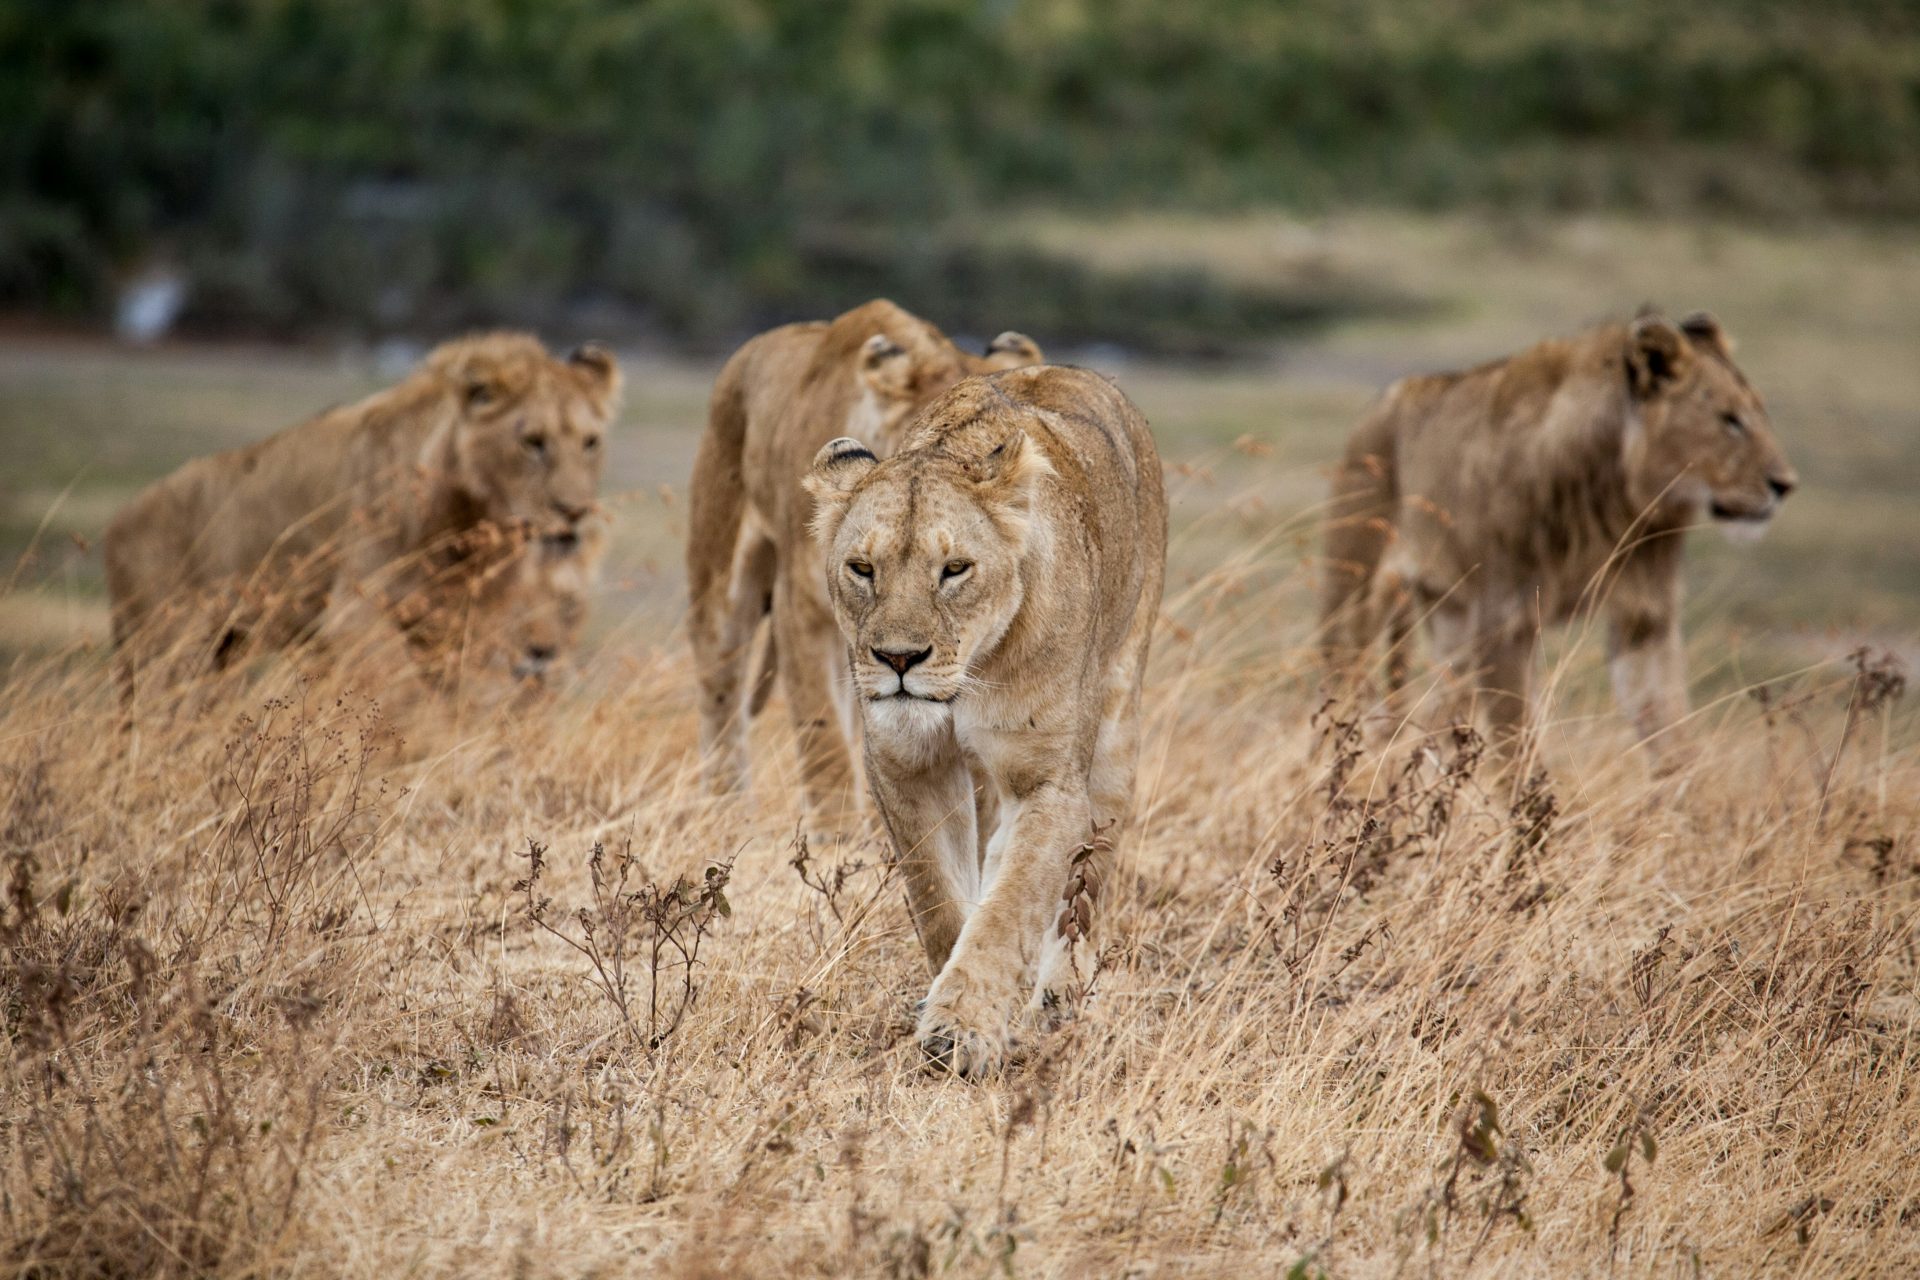 Why don’t lions attack tourists?